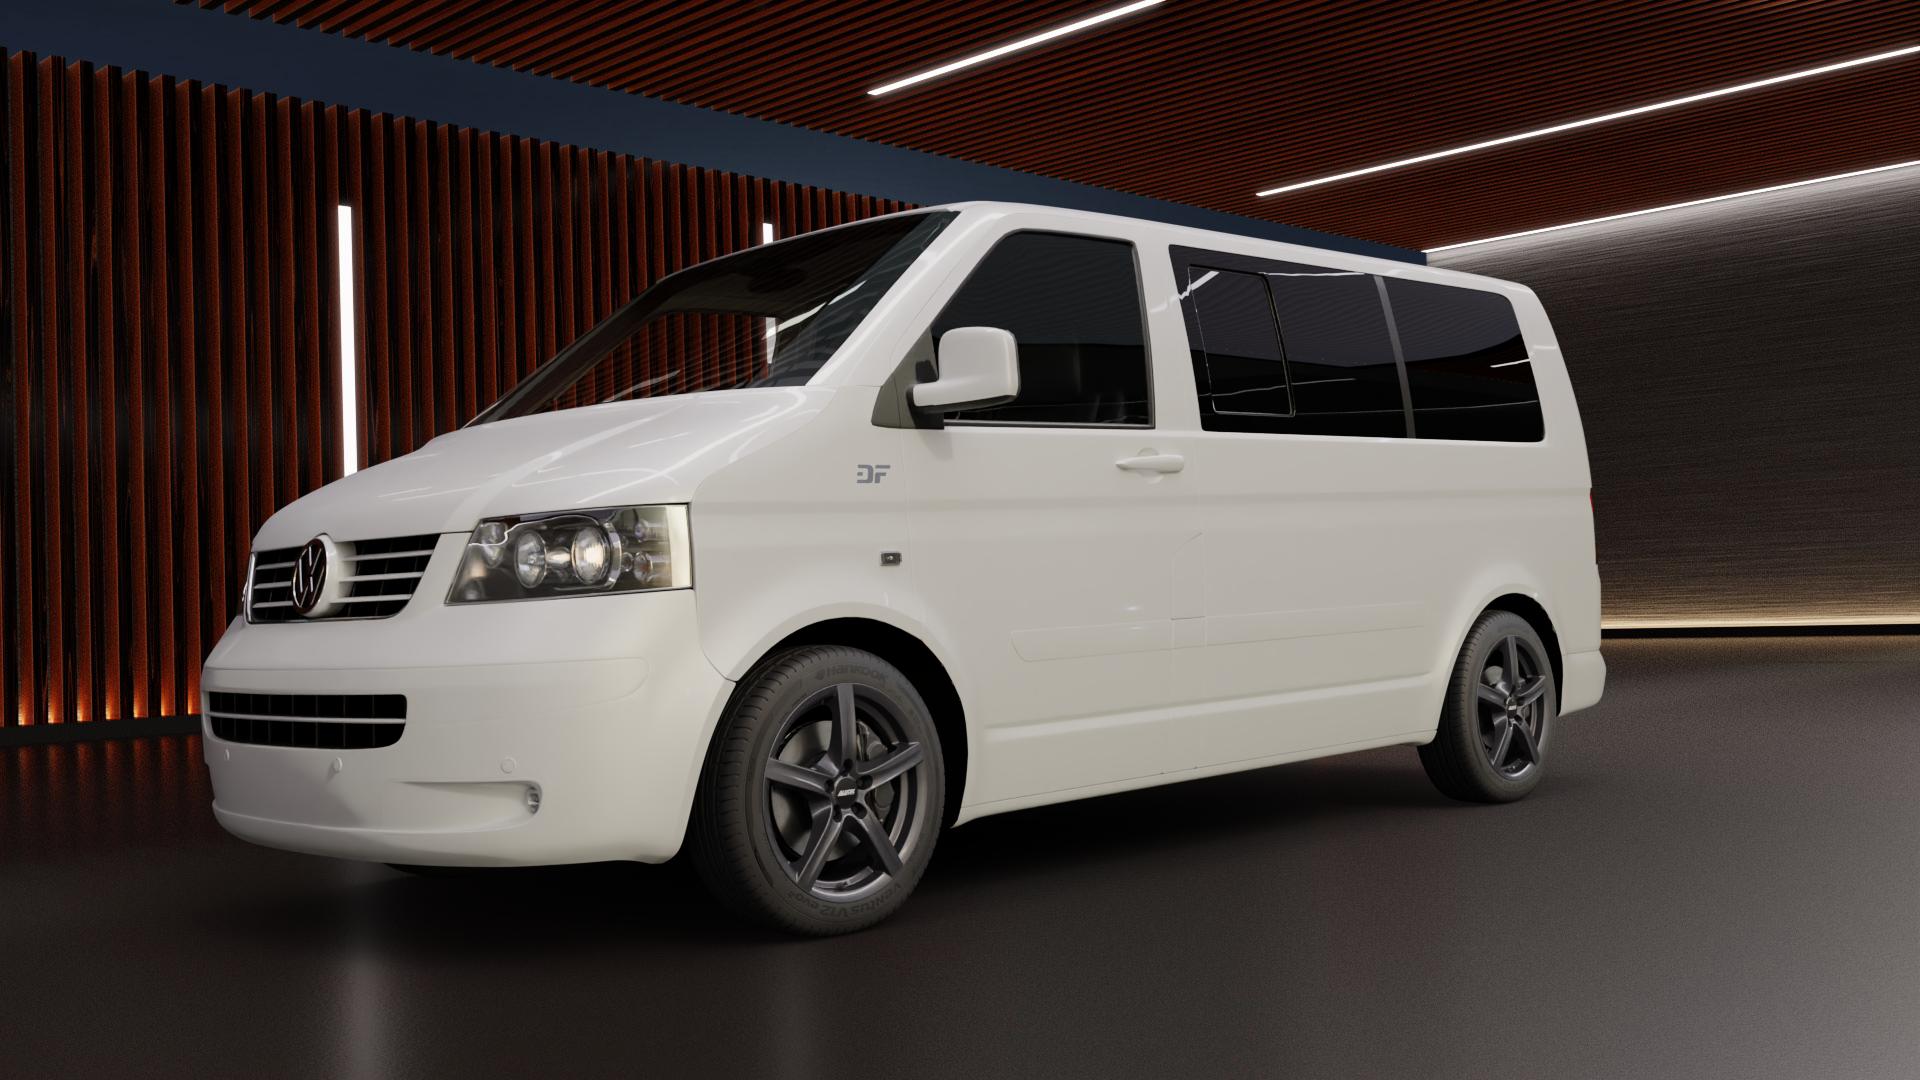 Volkswagen (VW) T5 Kombi 2,5l TDI 4Motion 96kW (131 hp) Wheels and Tyre  Packages | velonity.com